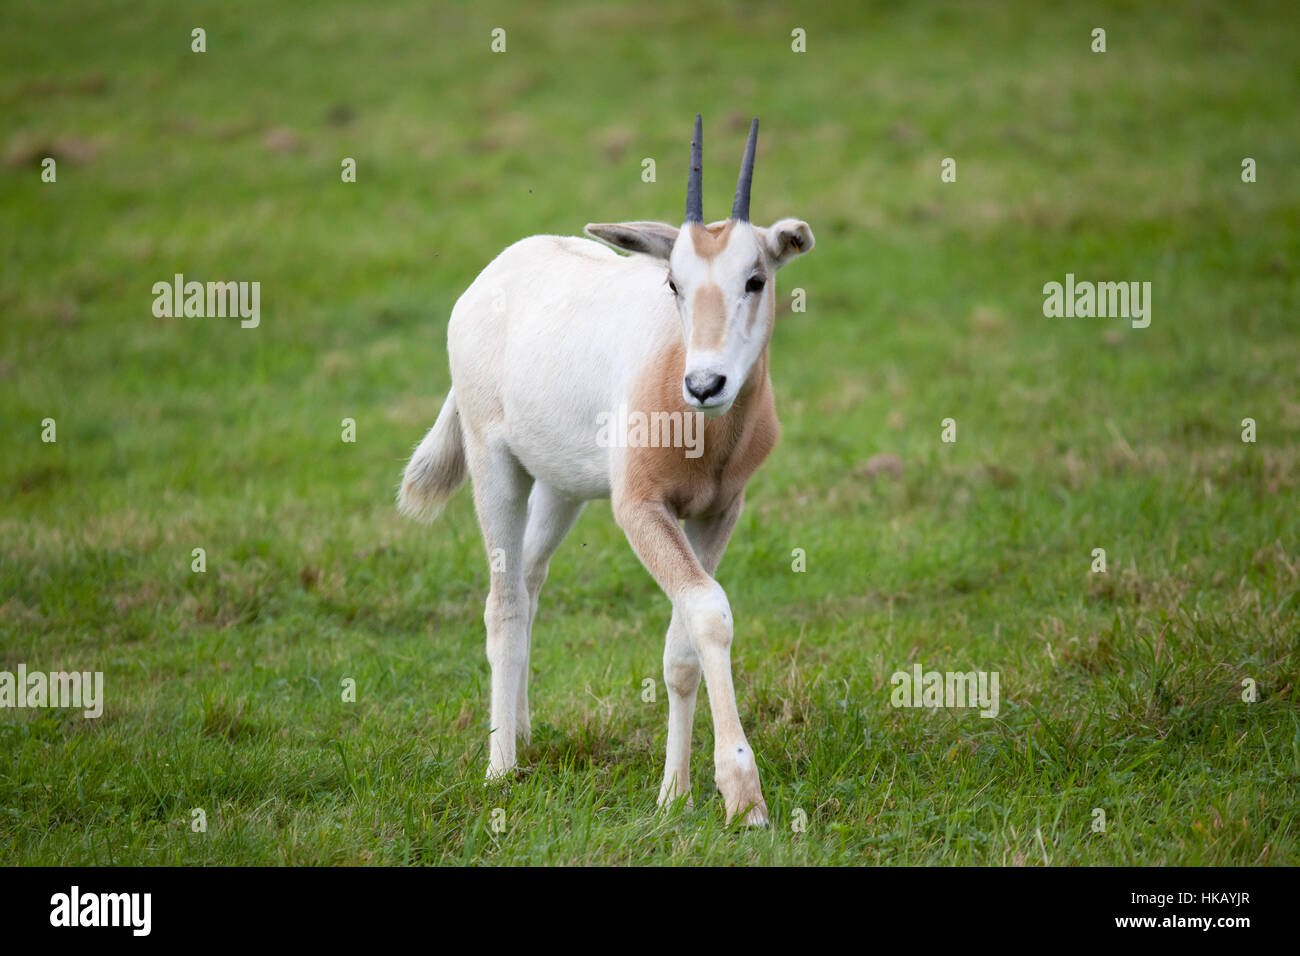 A young scimitar-horned oryx calf walking in a field Stock Photo